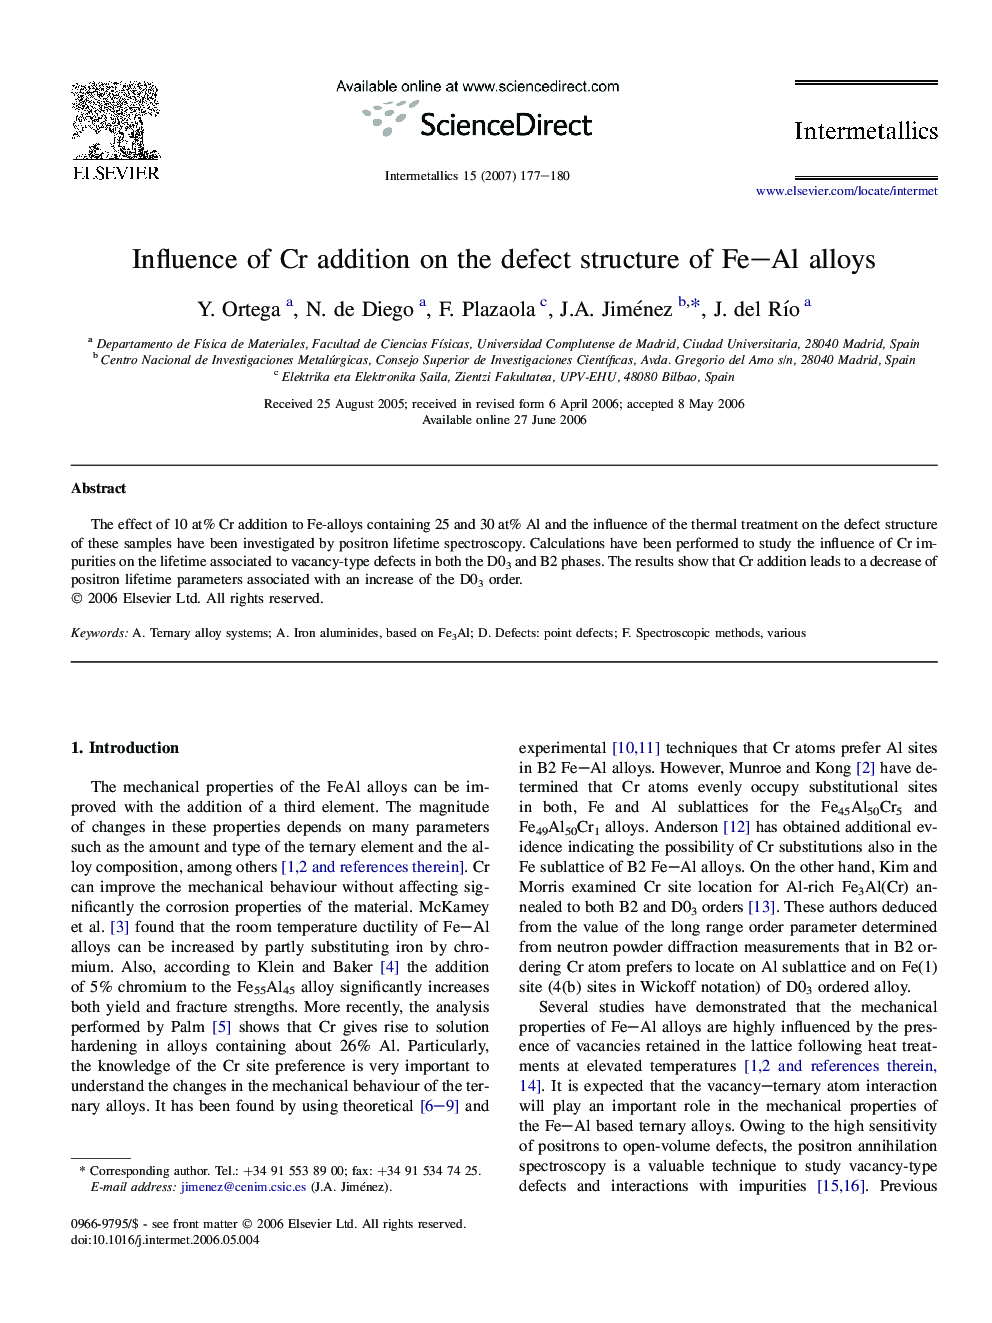 Influence of Cr addition on the defect structure of Fe-Al alloys